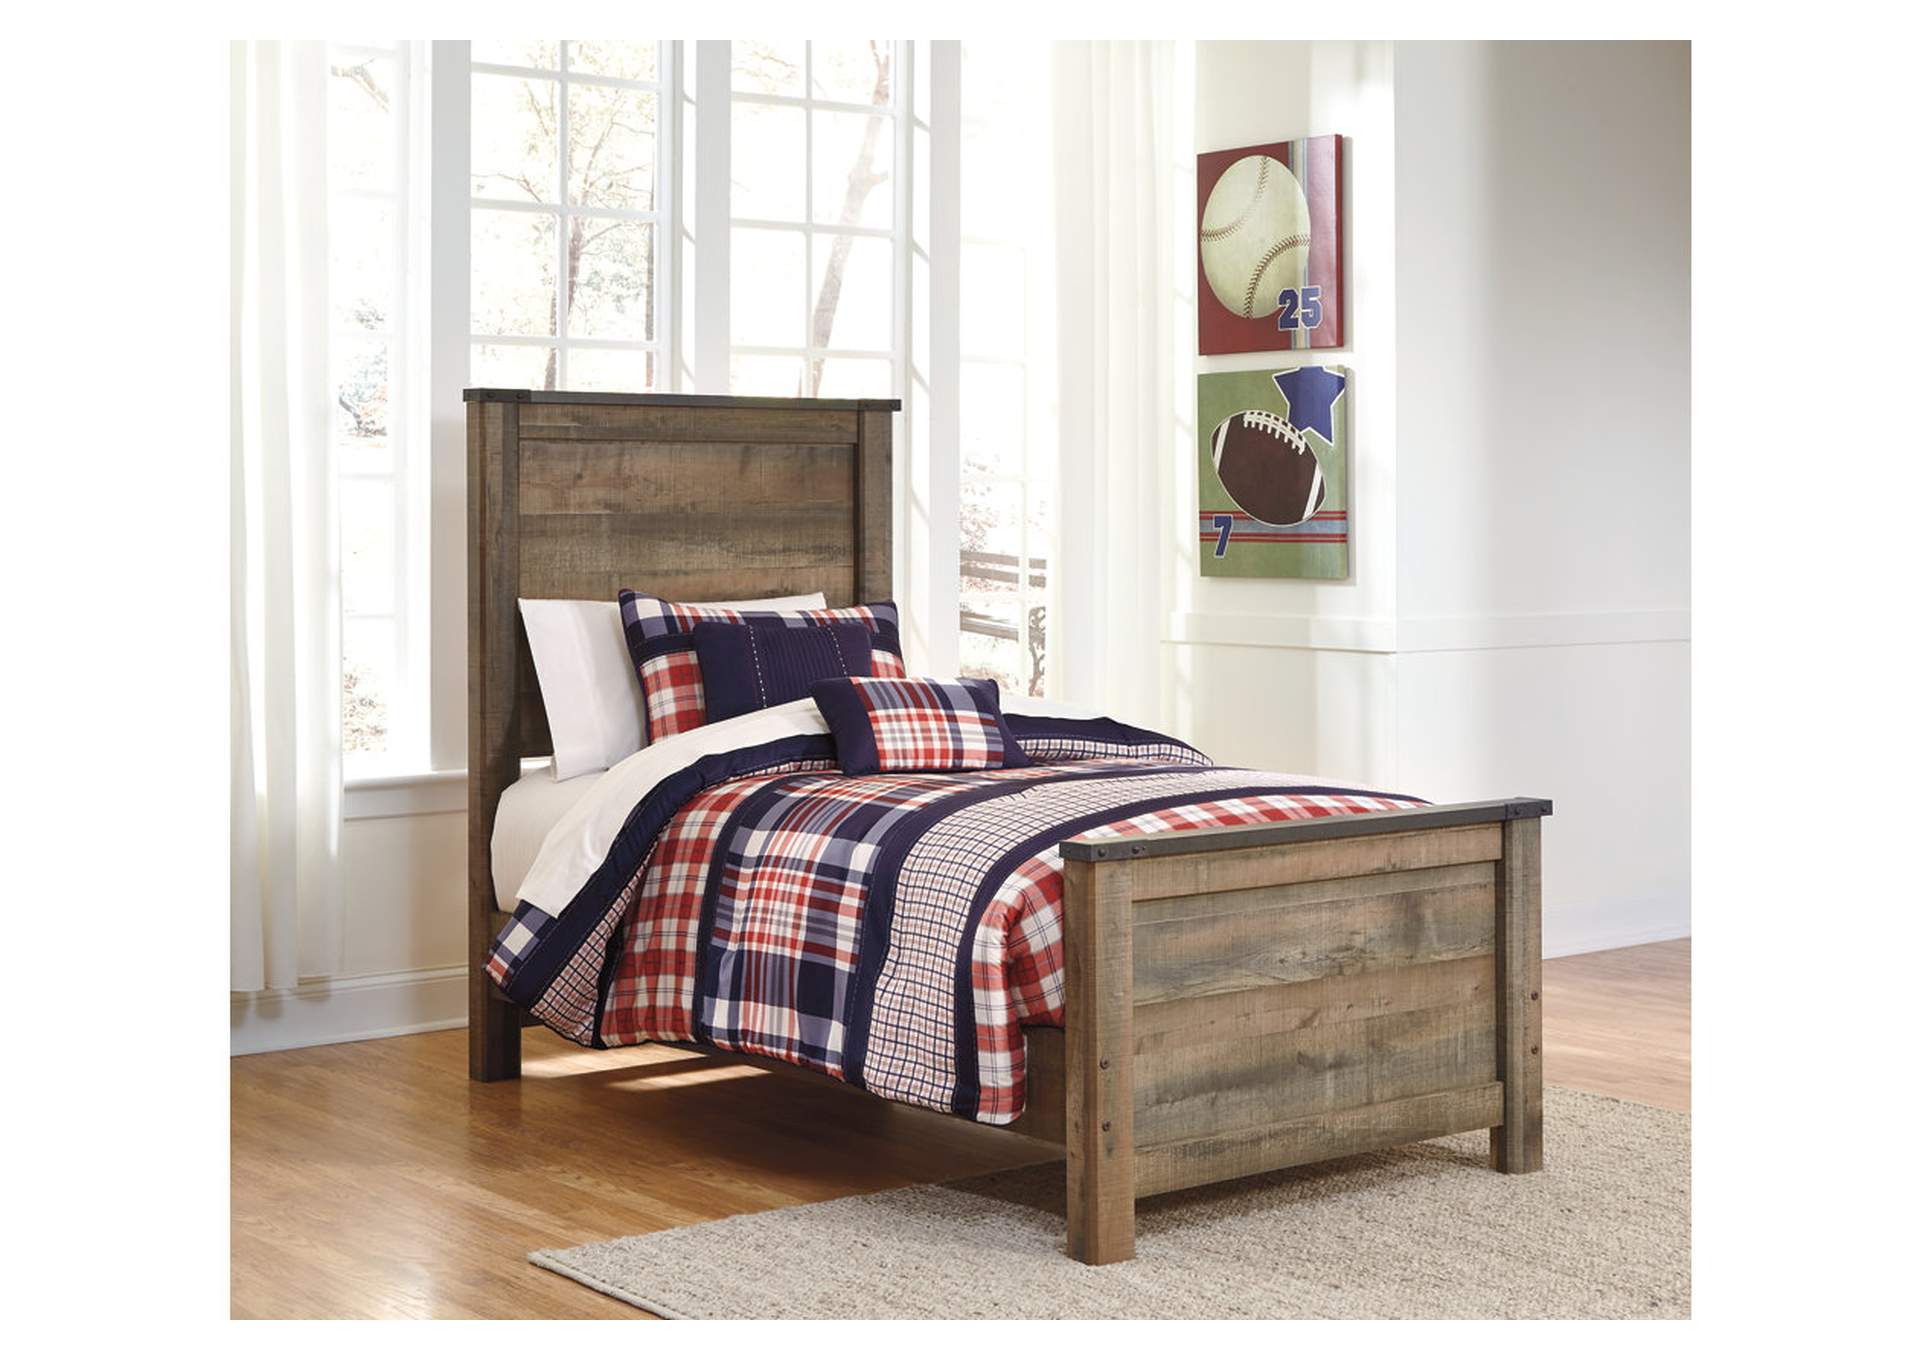 Trinell Twin Panel Bed,Signature Design By Ashley